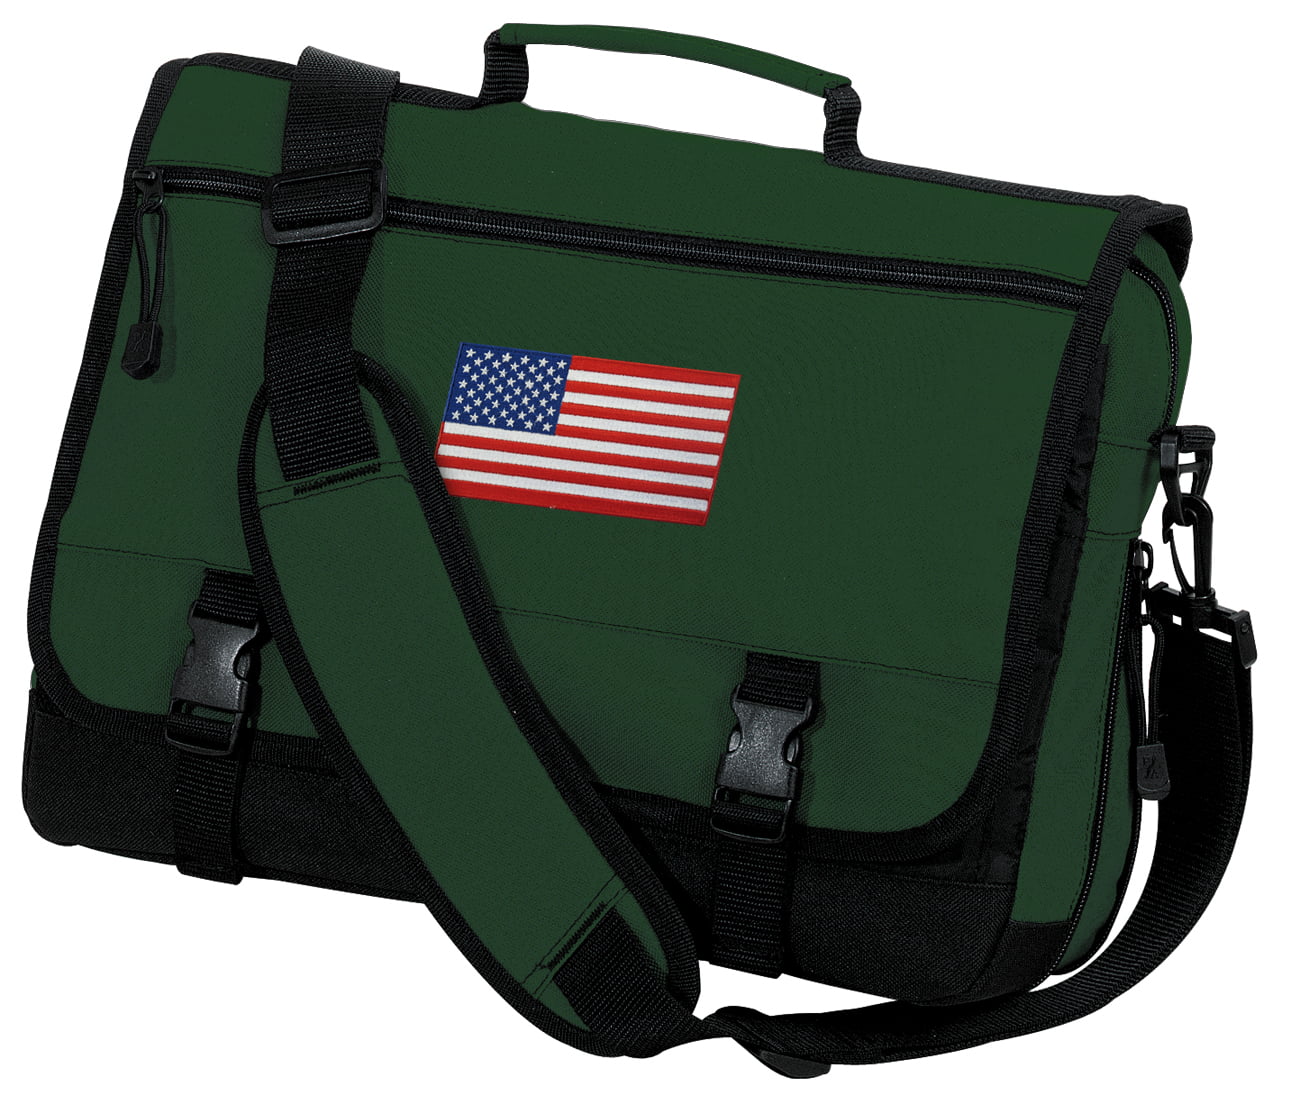 Great to Business American USA Flag Wood 15.6 Inch Tote Bag Laptop Messenger Shoulder Bag Carrying Briefcase Laptop Bag Briefcase Shoulder Bag School